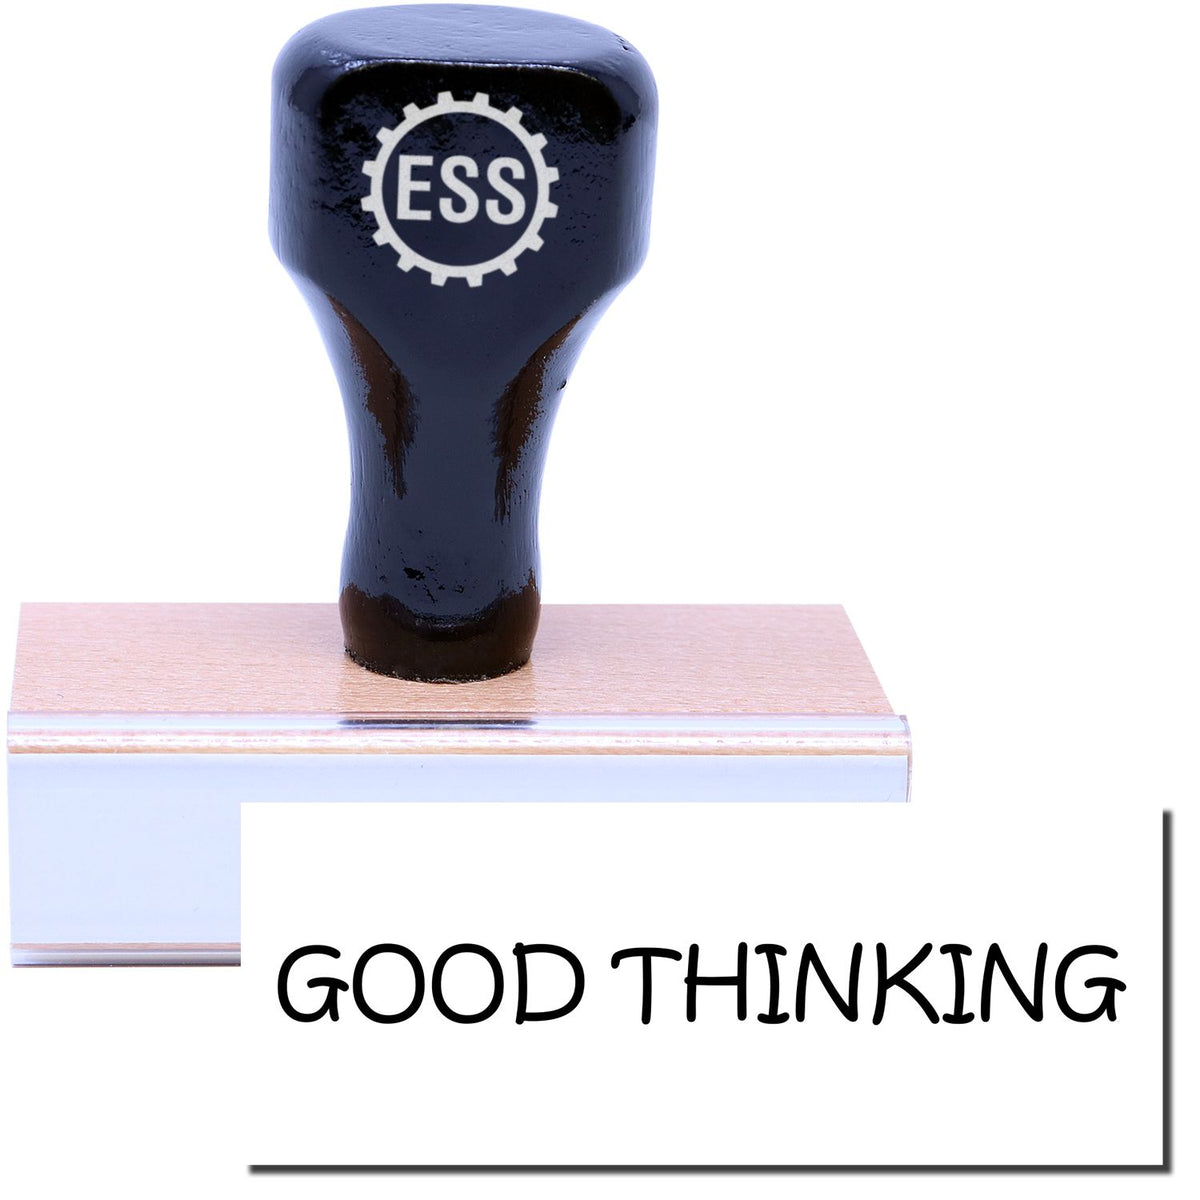 A stock office rubber stamp with a stamped image showing how the text &quot;GOOD THINKING&quot; in a large font is displayed after stamping.